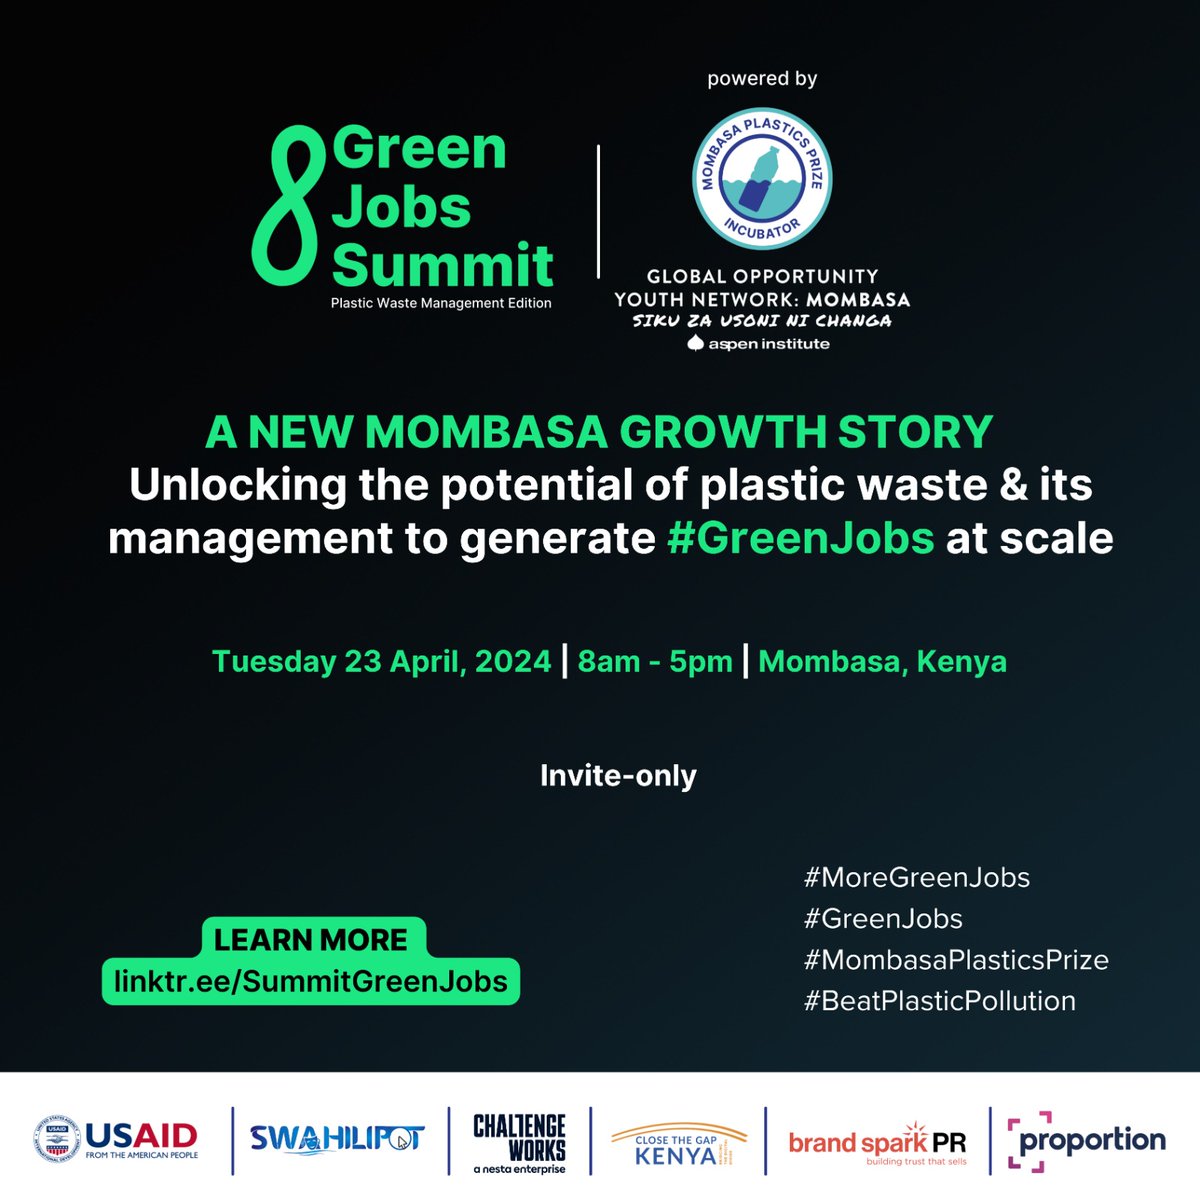 Join leaders and changemakers Tomorrow for the #GreenJobs Summit! Powered by #MombasaPlasticsPrize Incubator and GOYN Mombasa, this event aims to catalyze #GreenJobs through discussions on plastic waste management and sustainability.🌱♻️ #MoreGreenJobs #BeatPlasticPollution